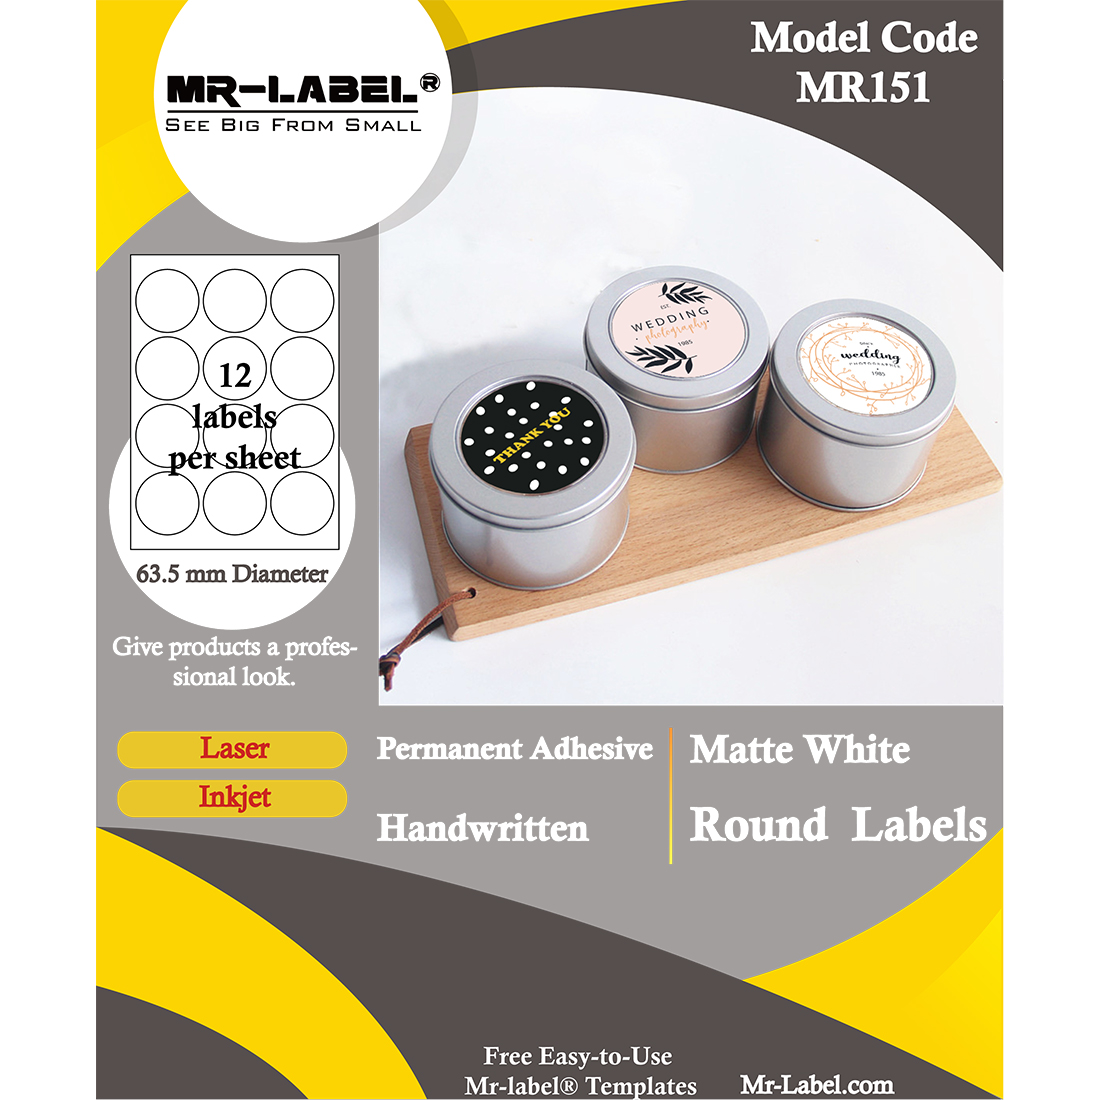 Universal Labels Round Diameter 24 MM 7000 Adhesive circular stickers Self-Adhesive 100 Sheets A4 24 MM Round